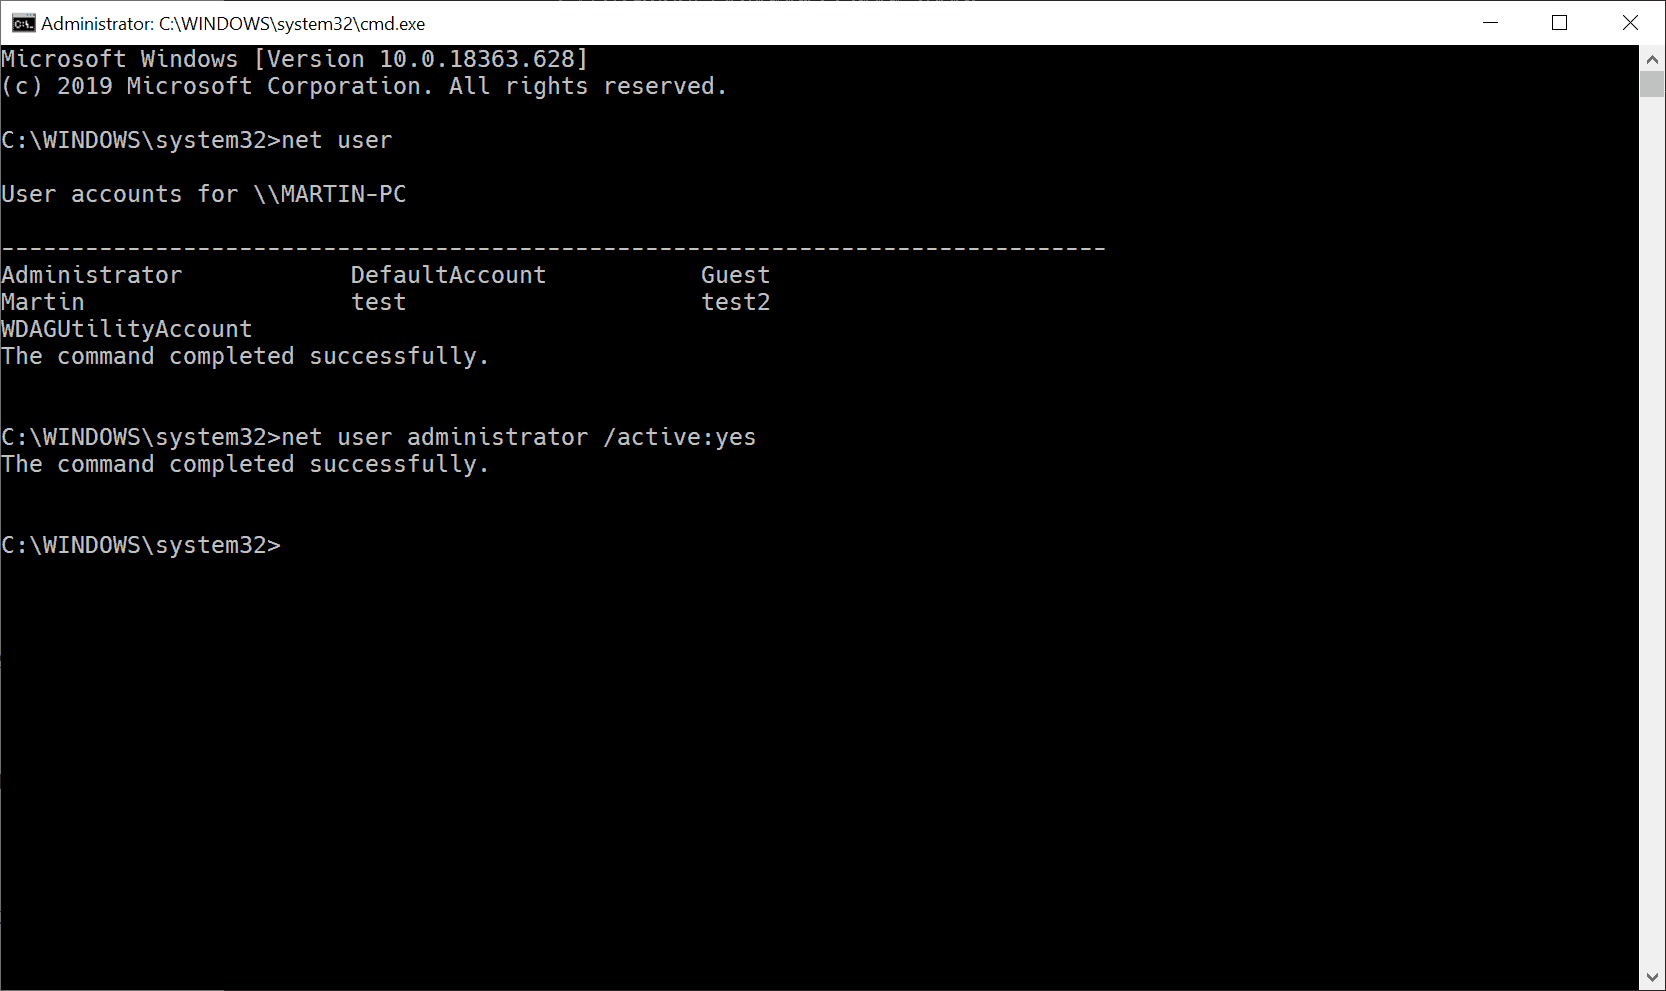 Open the Command Prompt as an administrator by pressing Win + X and selecting "Command Prompt (Admin)".
Type sfc /scannow and press Enter to start the scan.